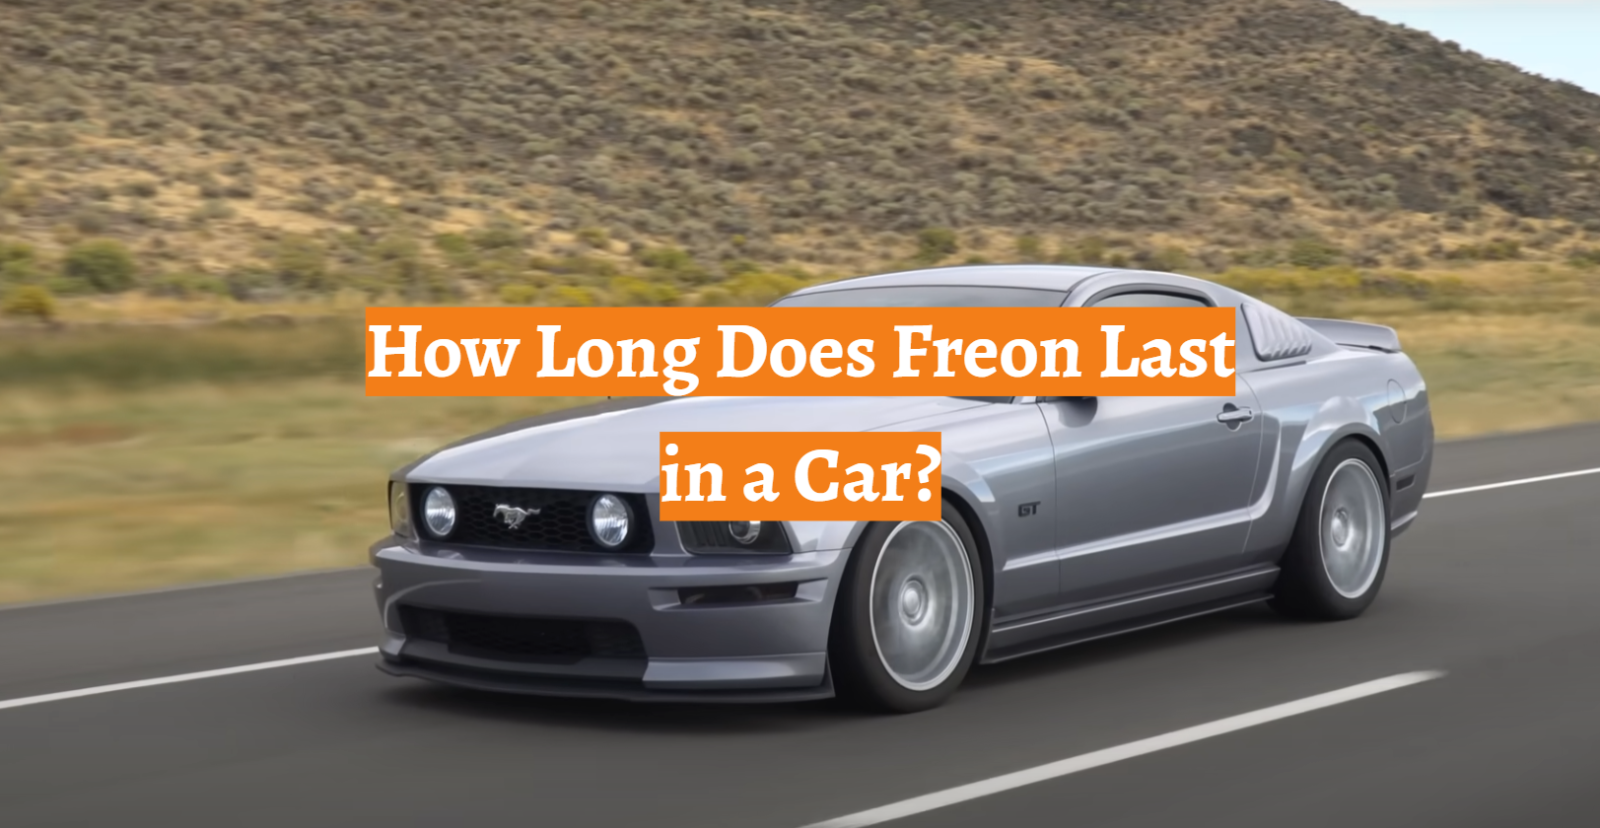 How Long Does Freon Last in a Car?